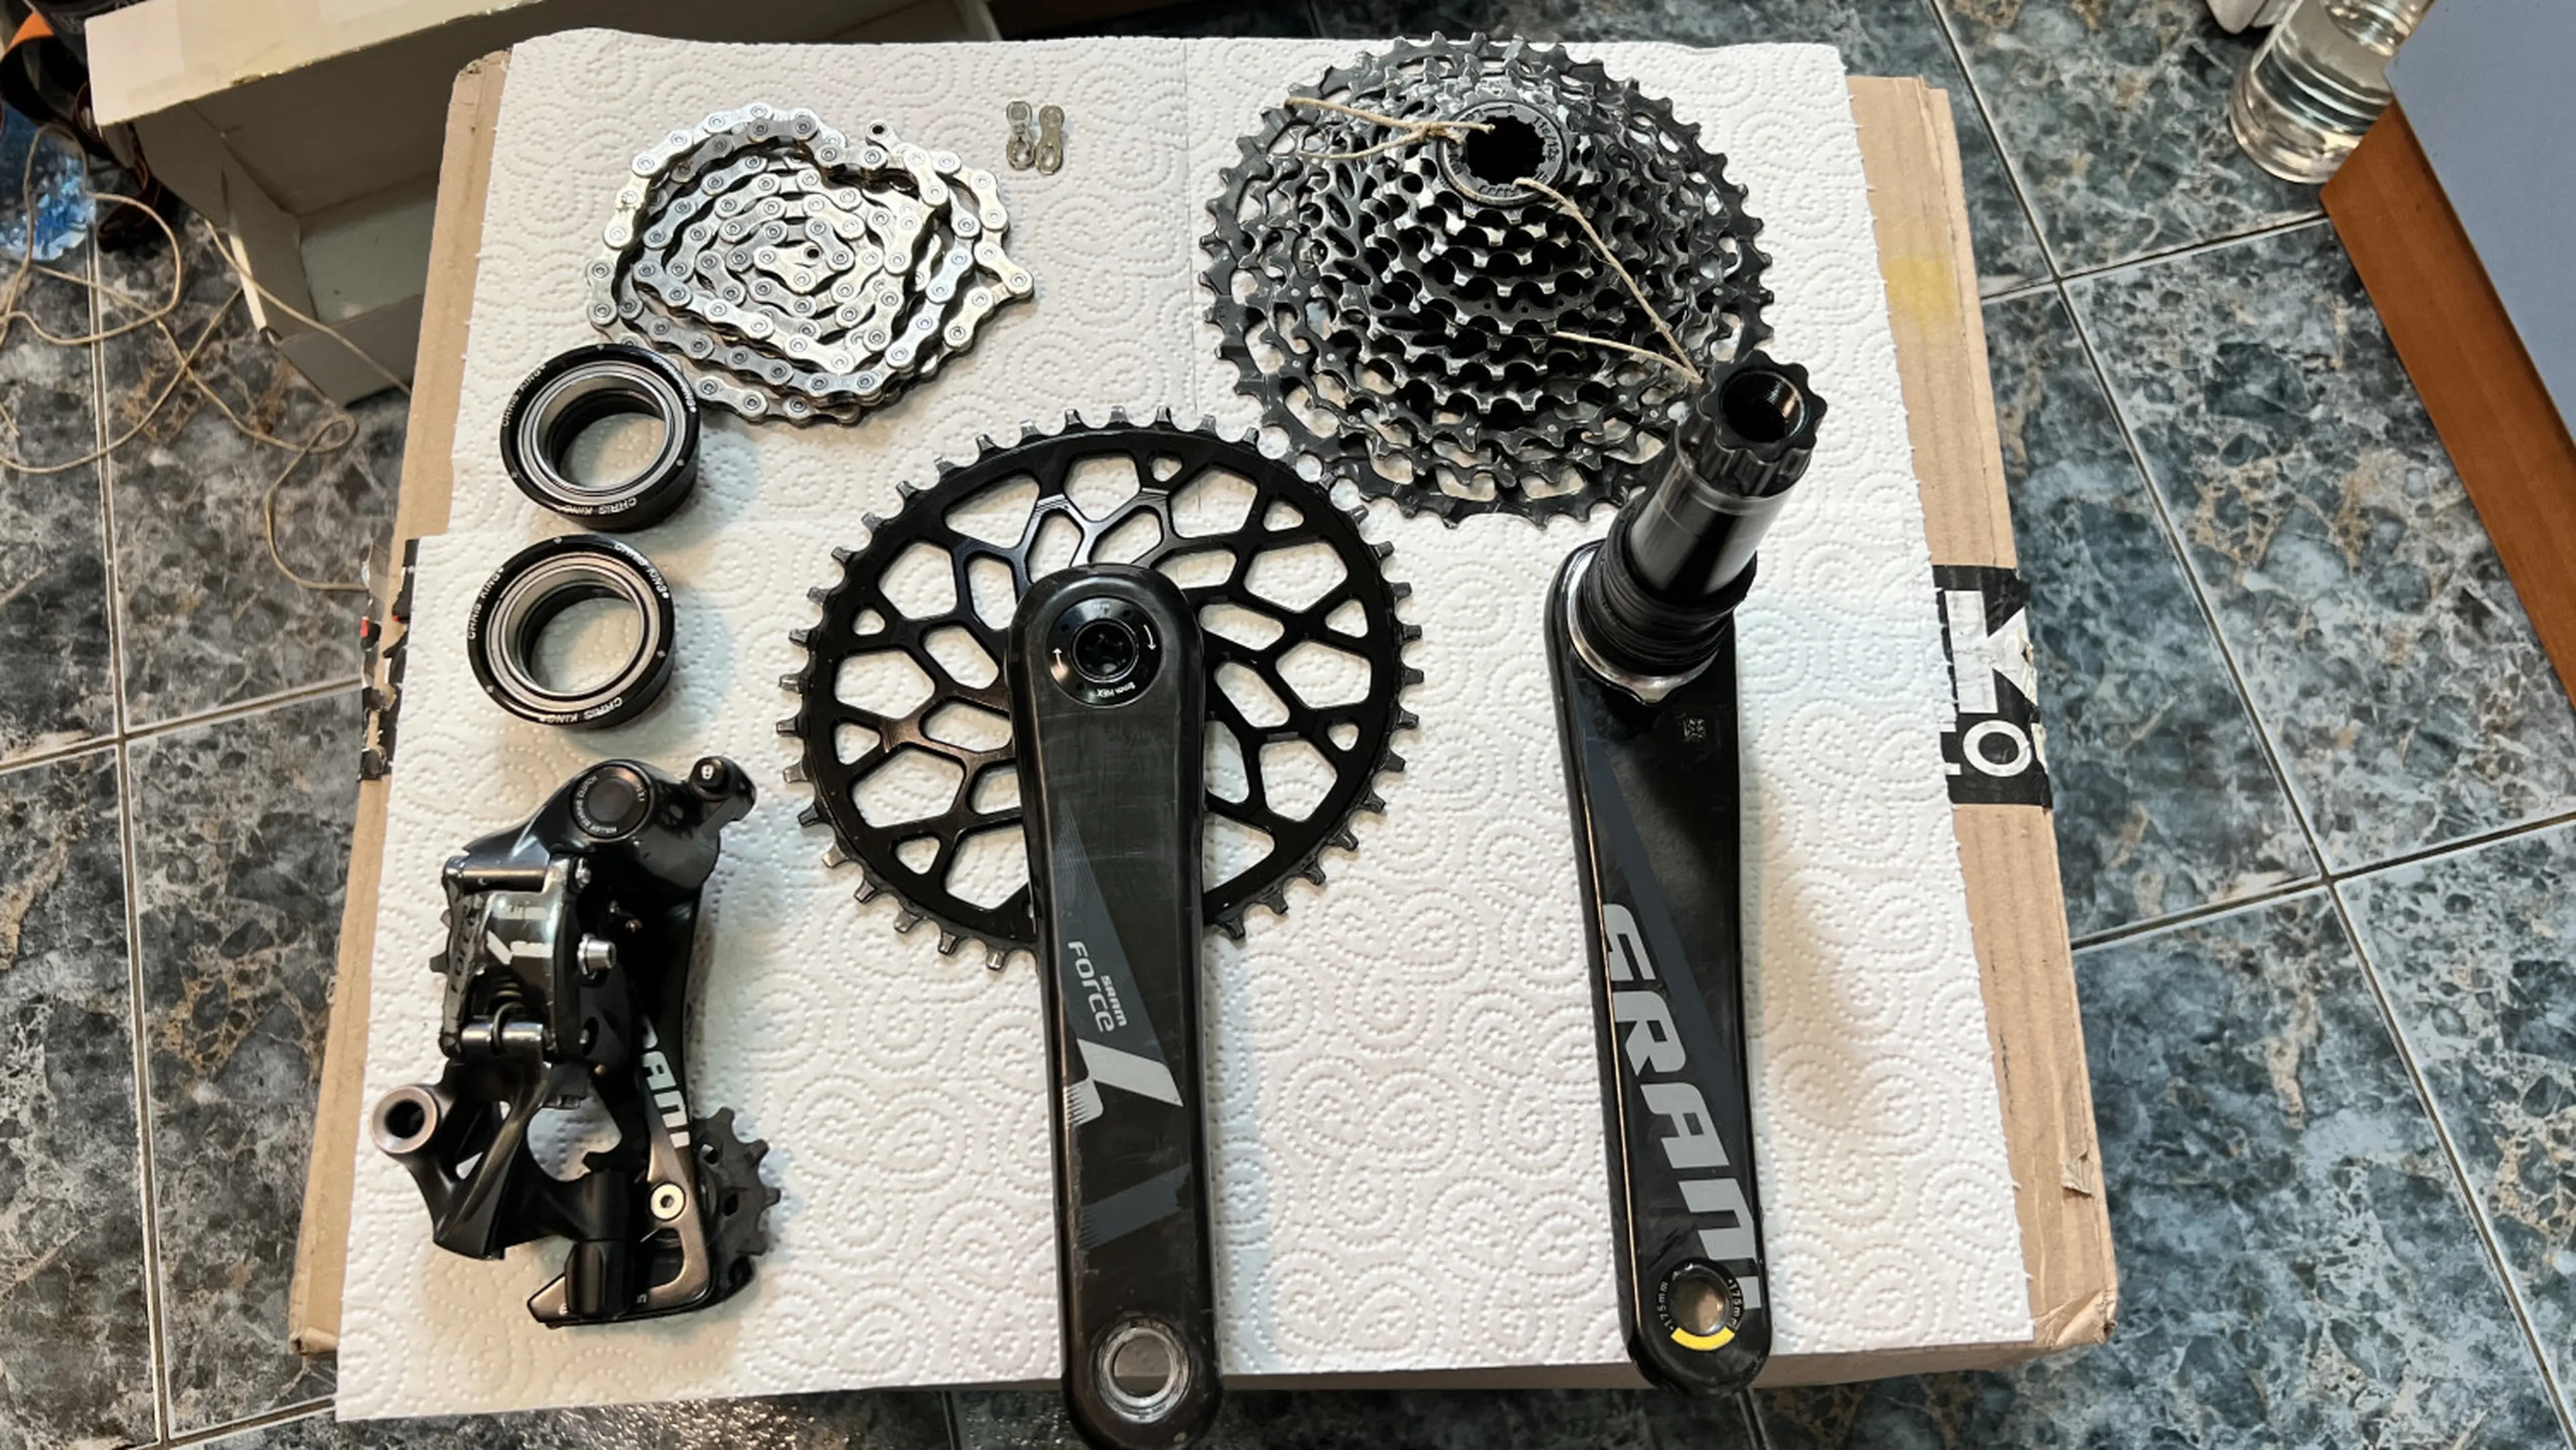 1. Groupset complet Sram Force CX1 1x11